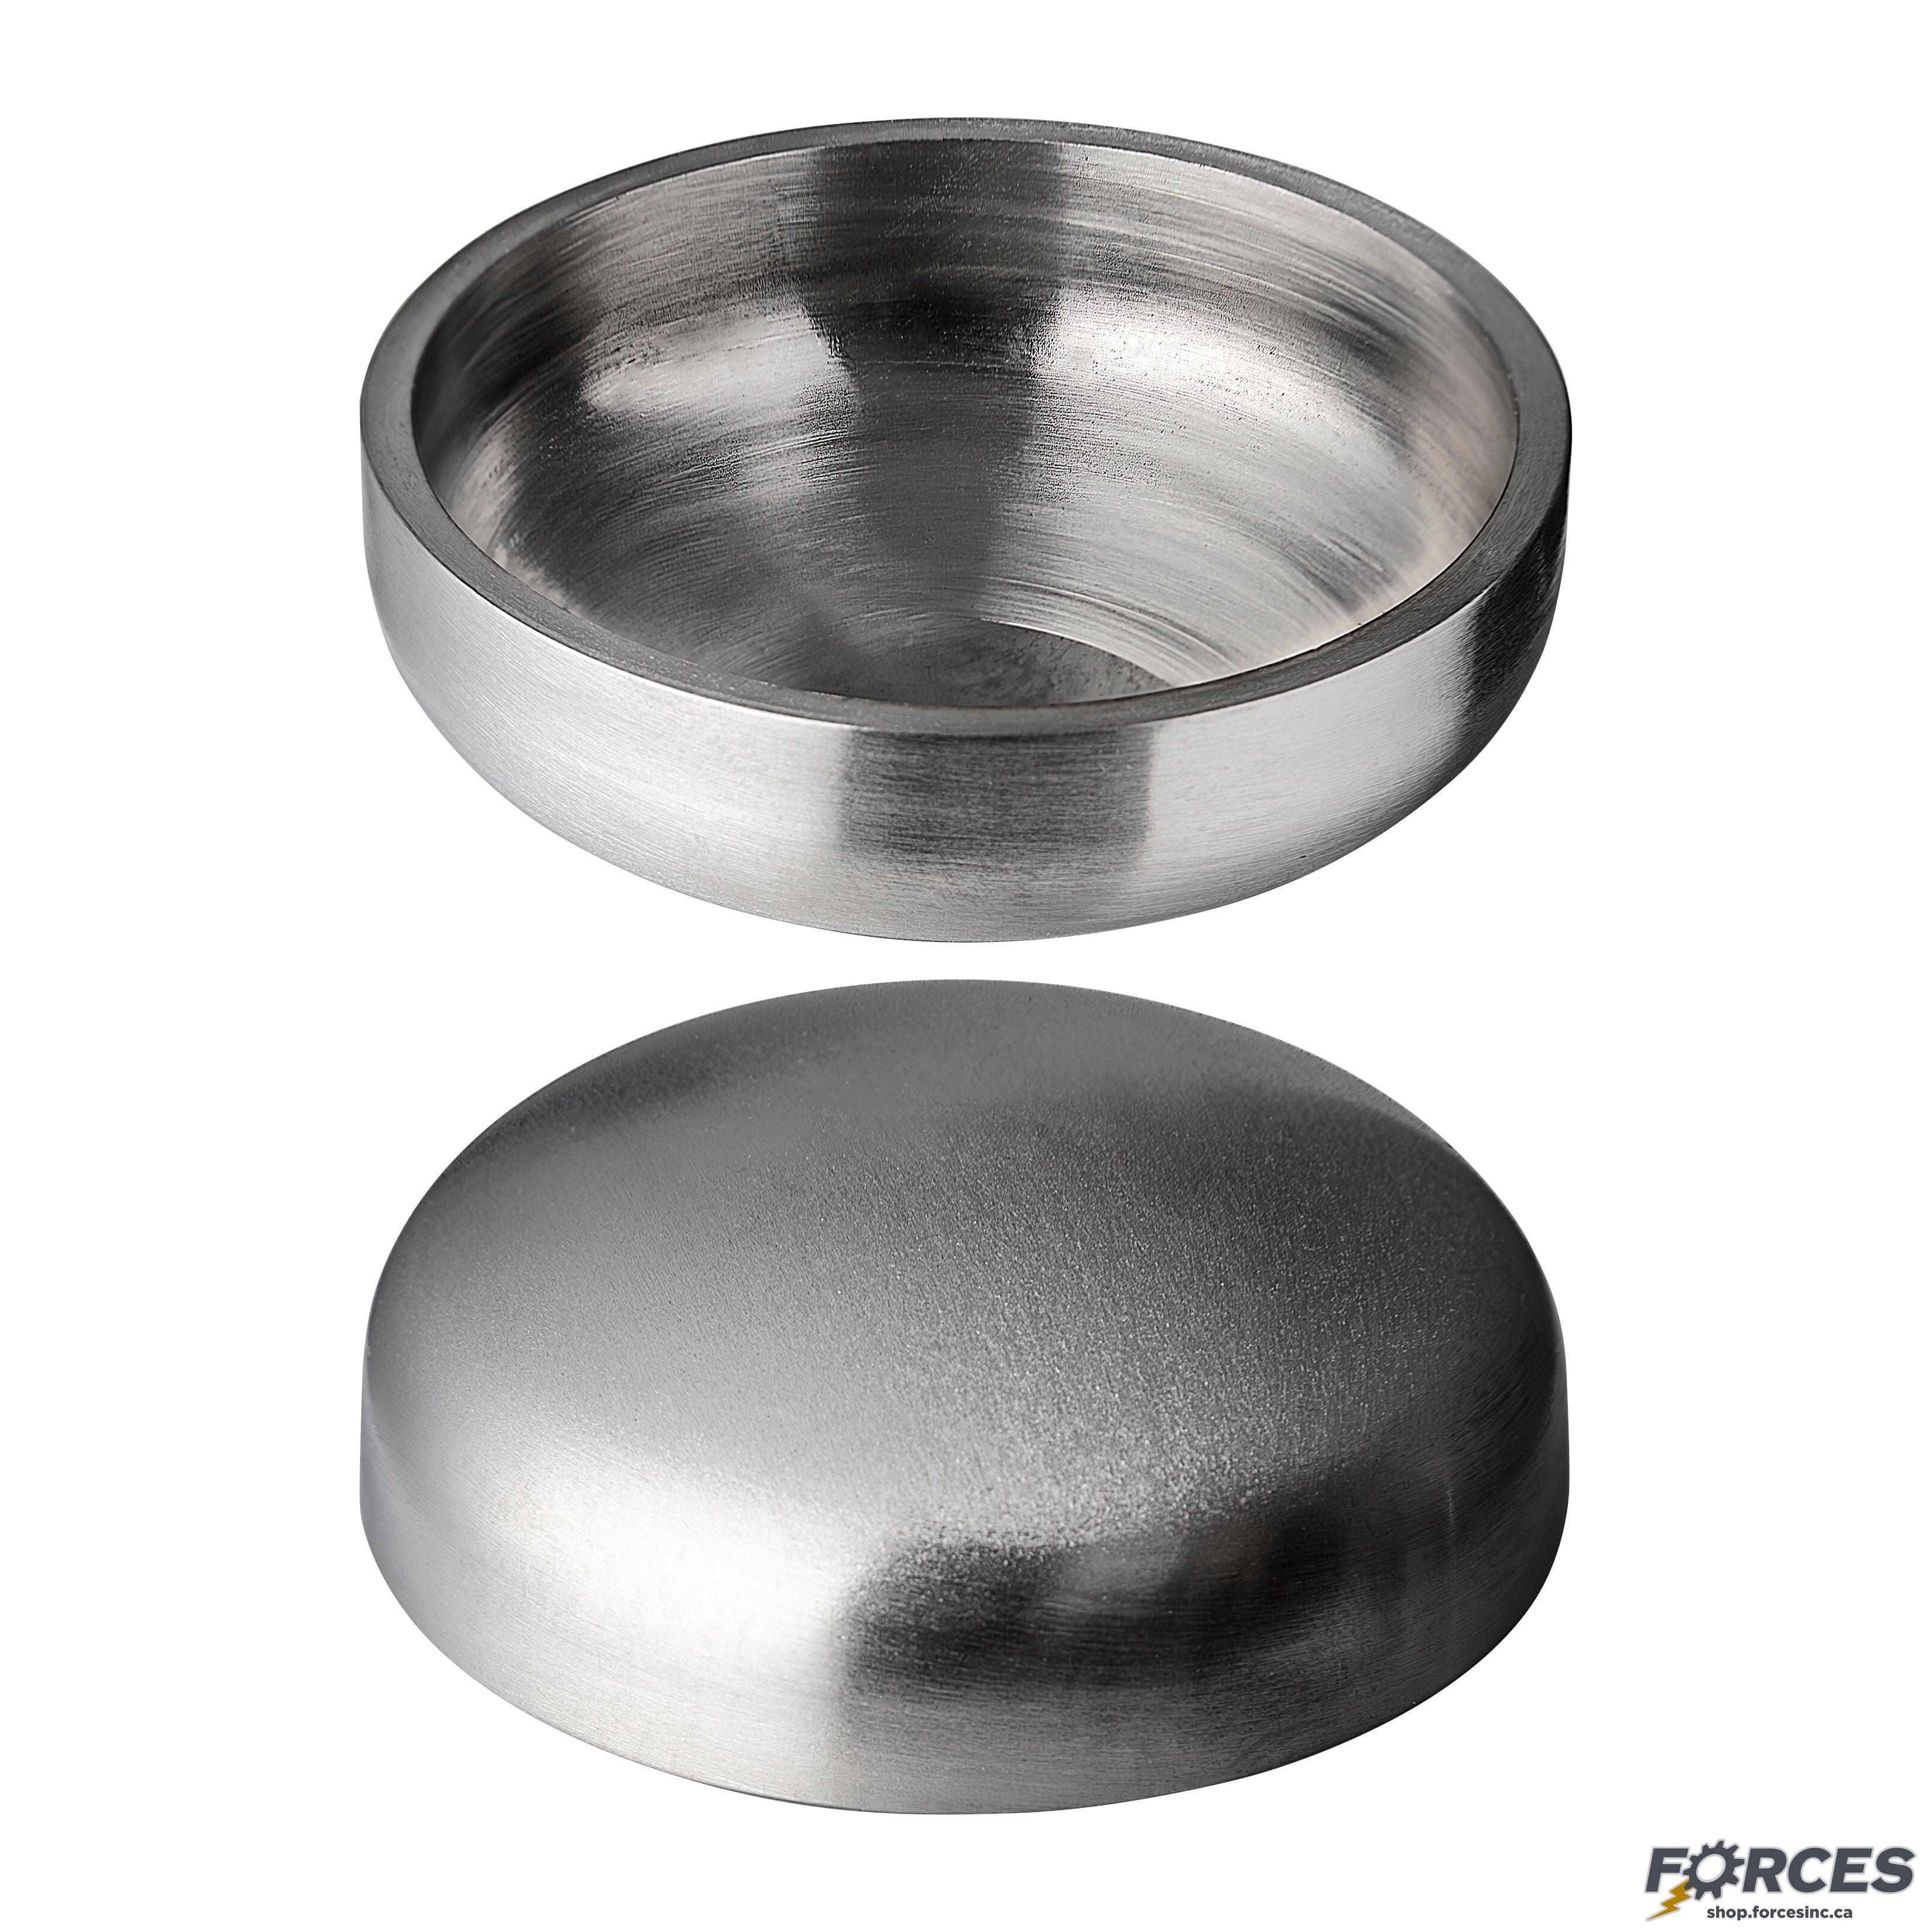 3" Butt Weld End Cap 16W - Stainless Steel 316 - Forces Inc